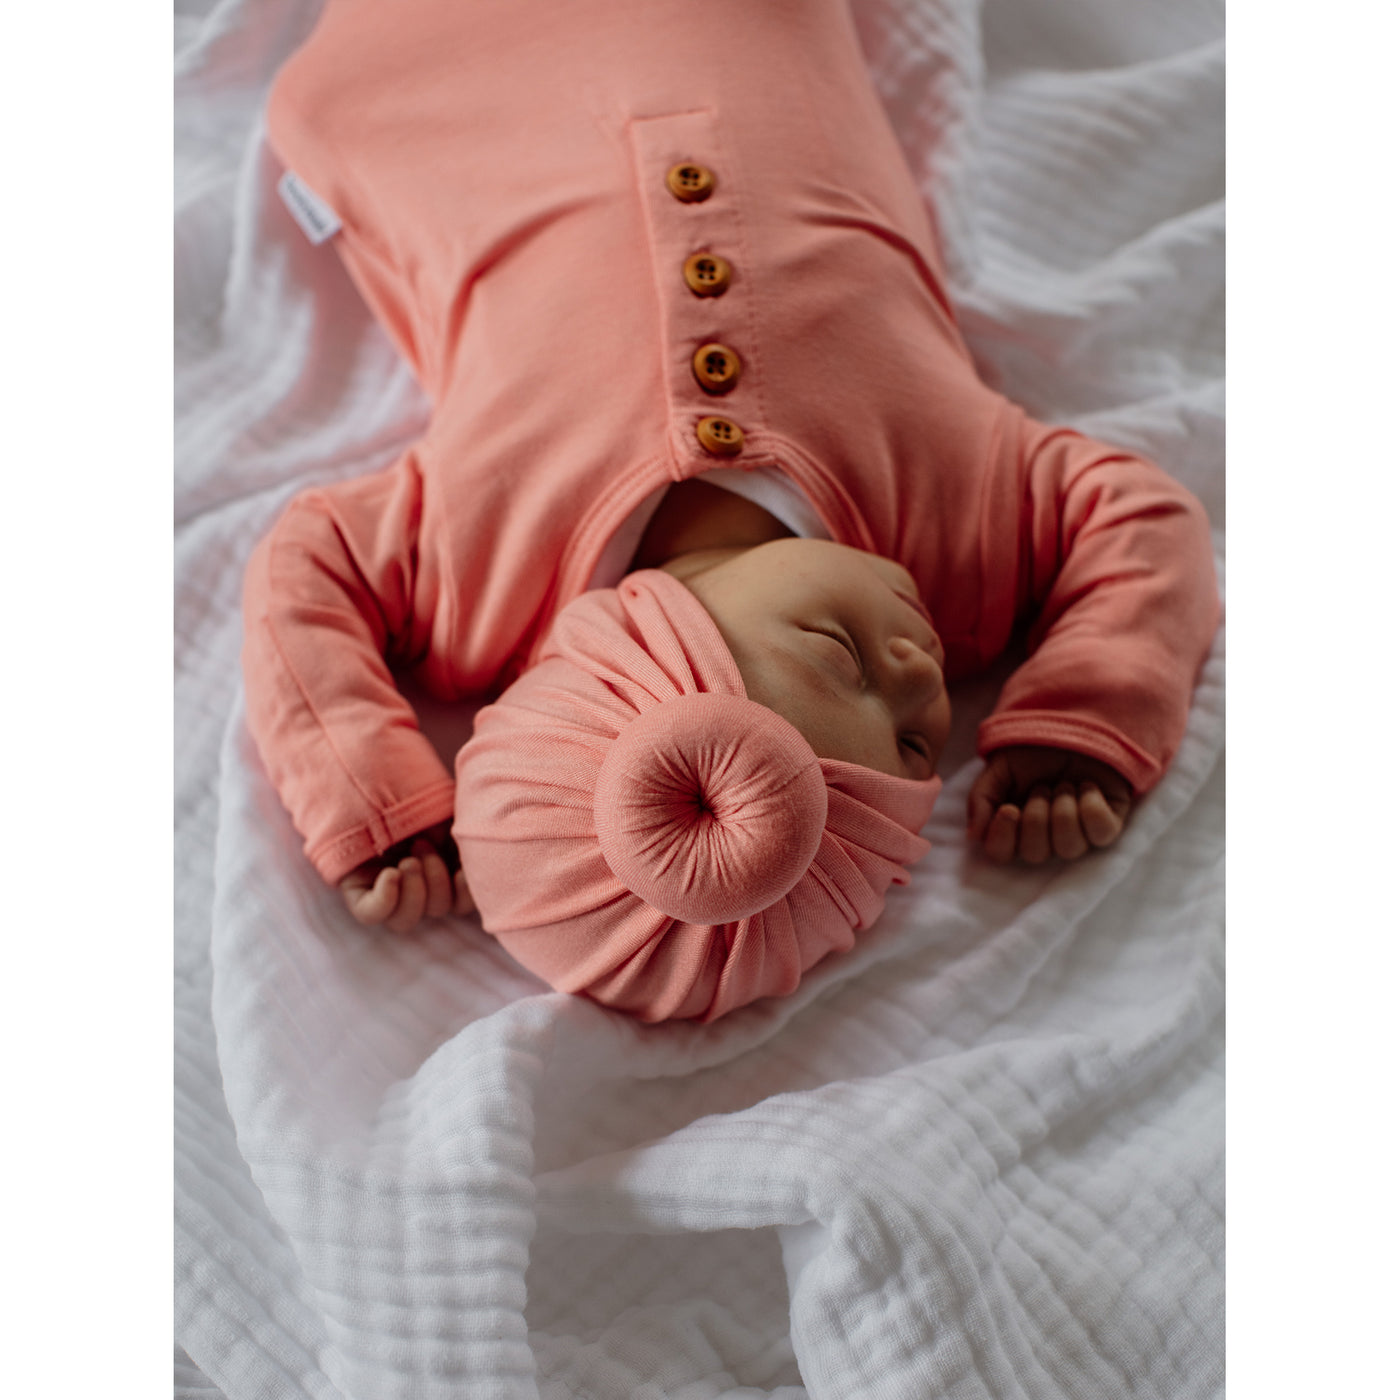 Baby Knotted Gown - Peach